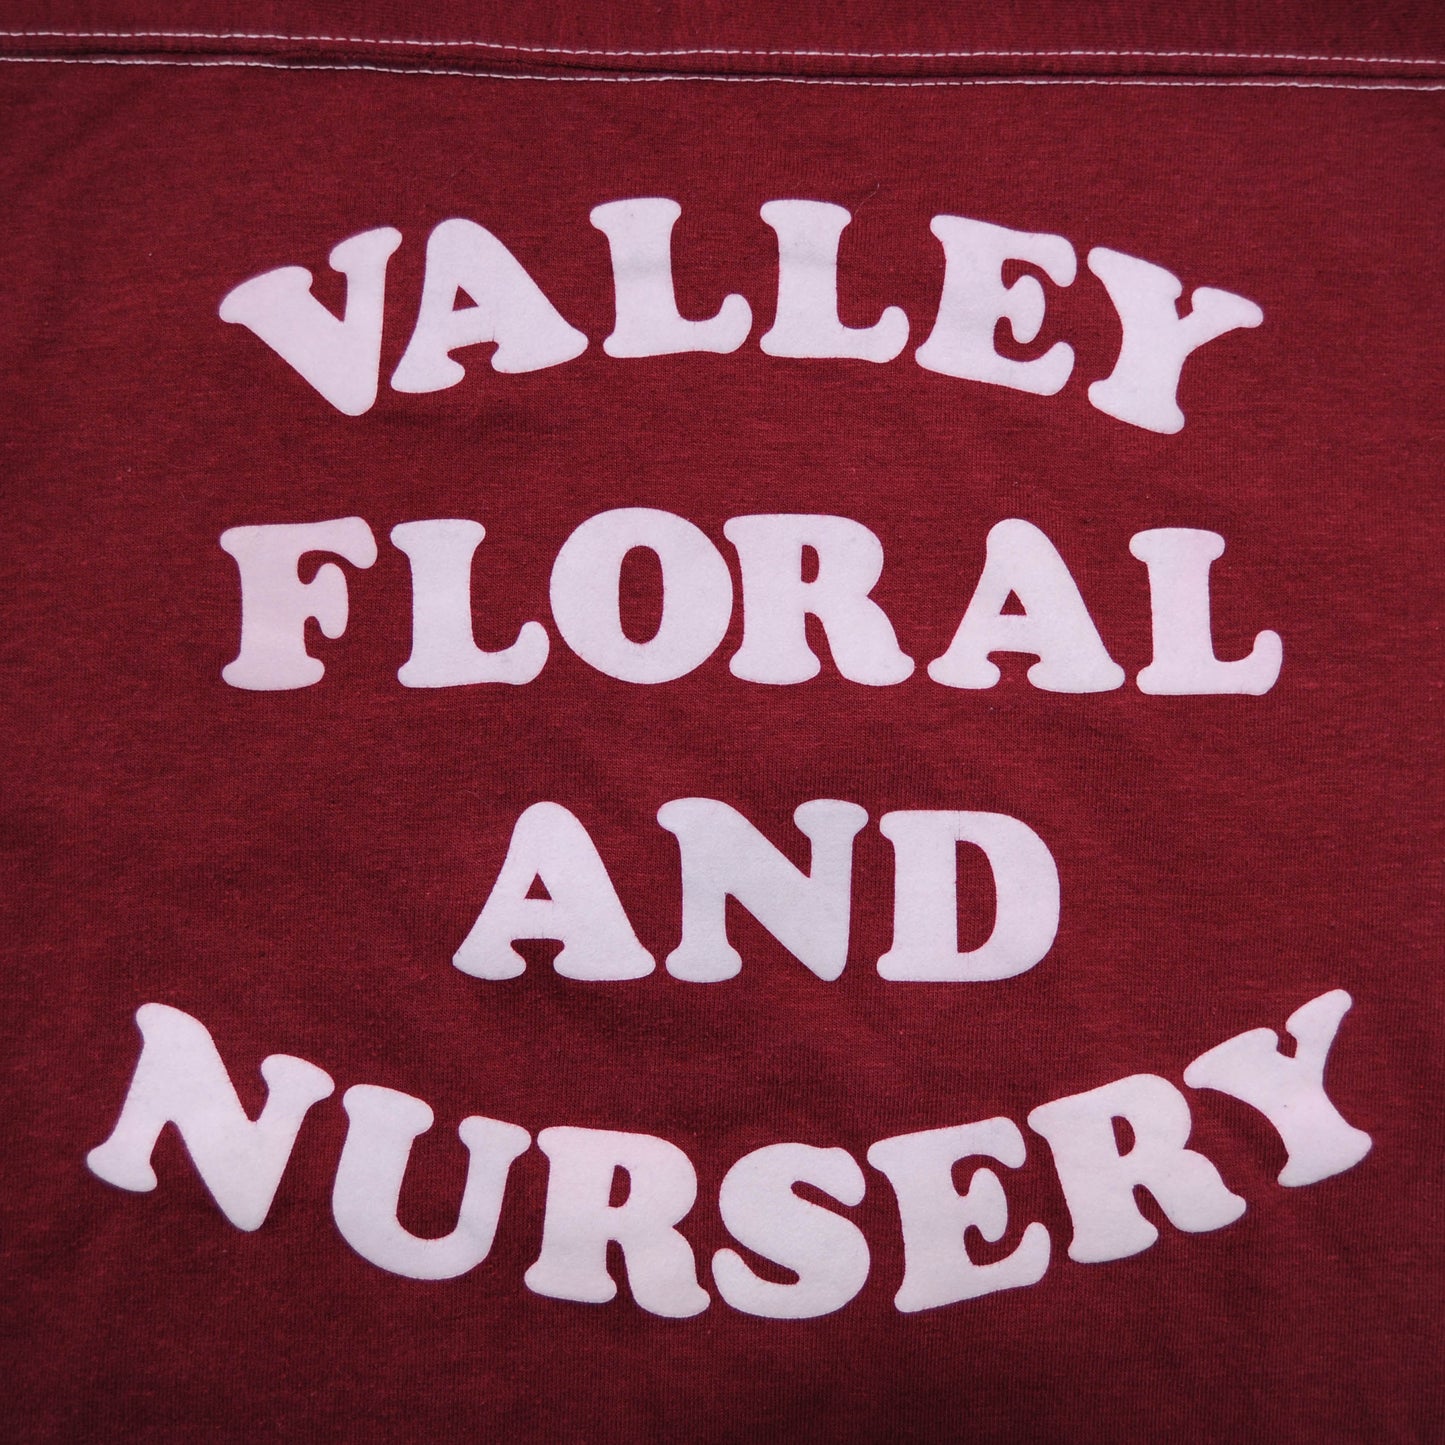 70's sportswear VALLY FLORAL AND NURSERY  フットボールTシャツ(L)/A3102T-S